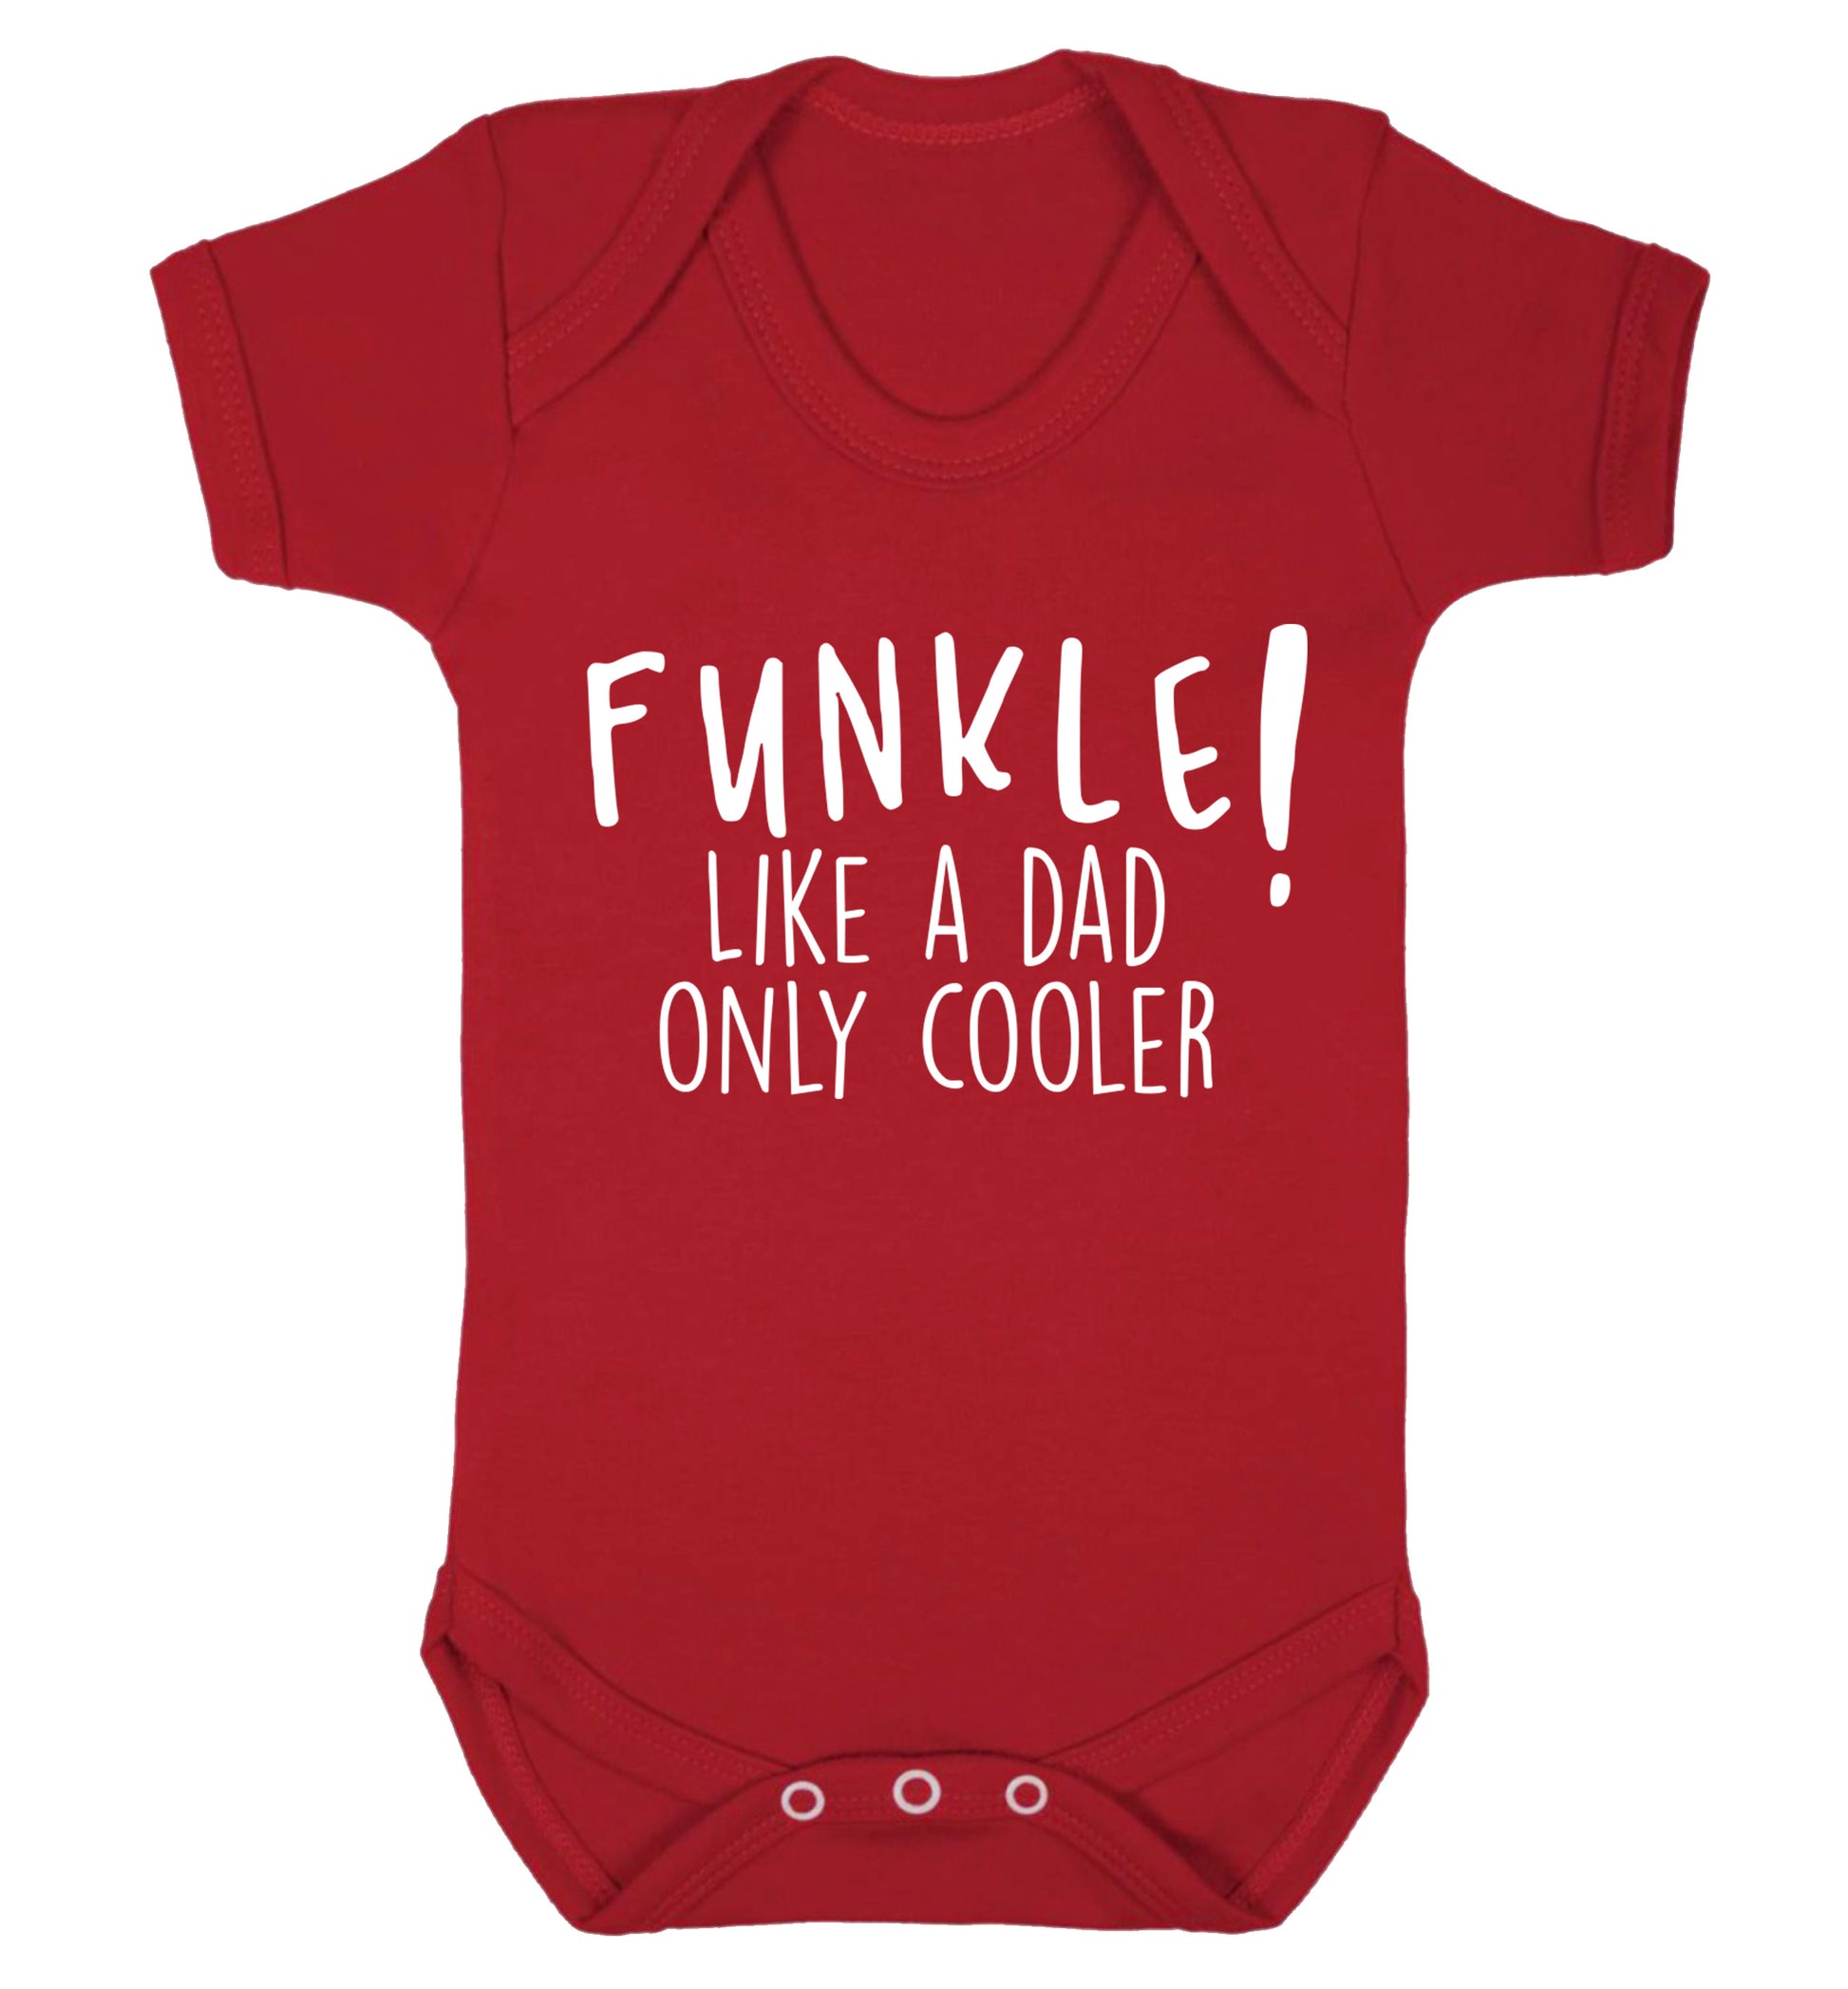 Funkle Like a Dad Only Cooler Baby Vest red 18-24 months